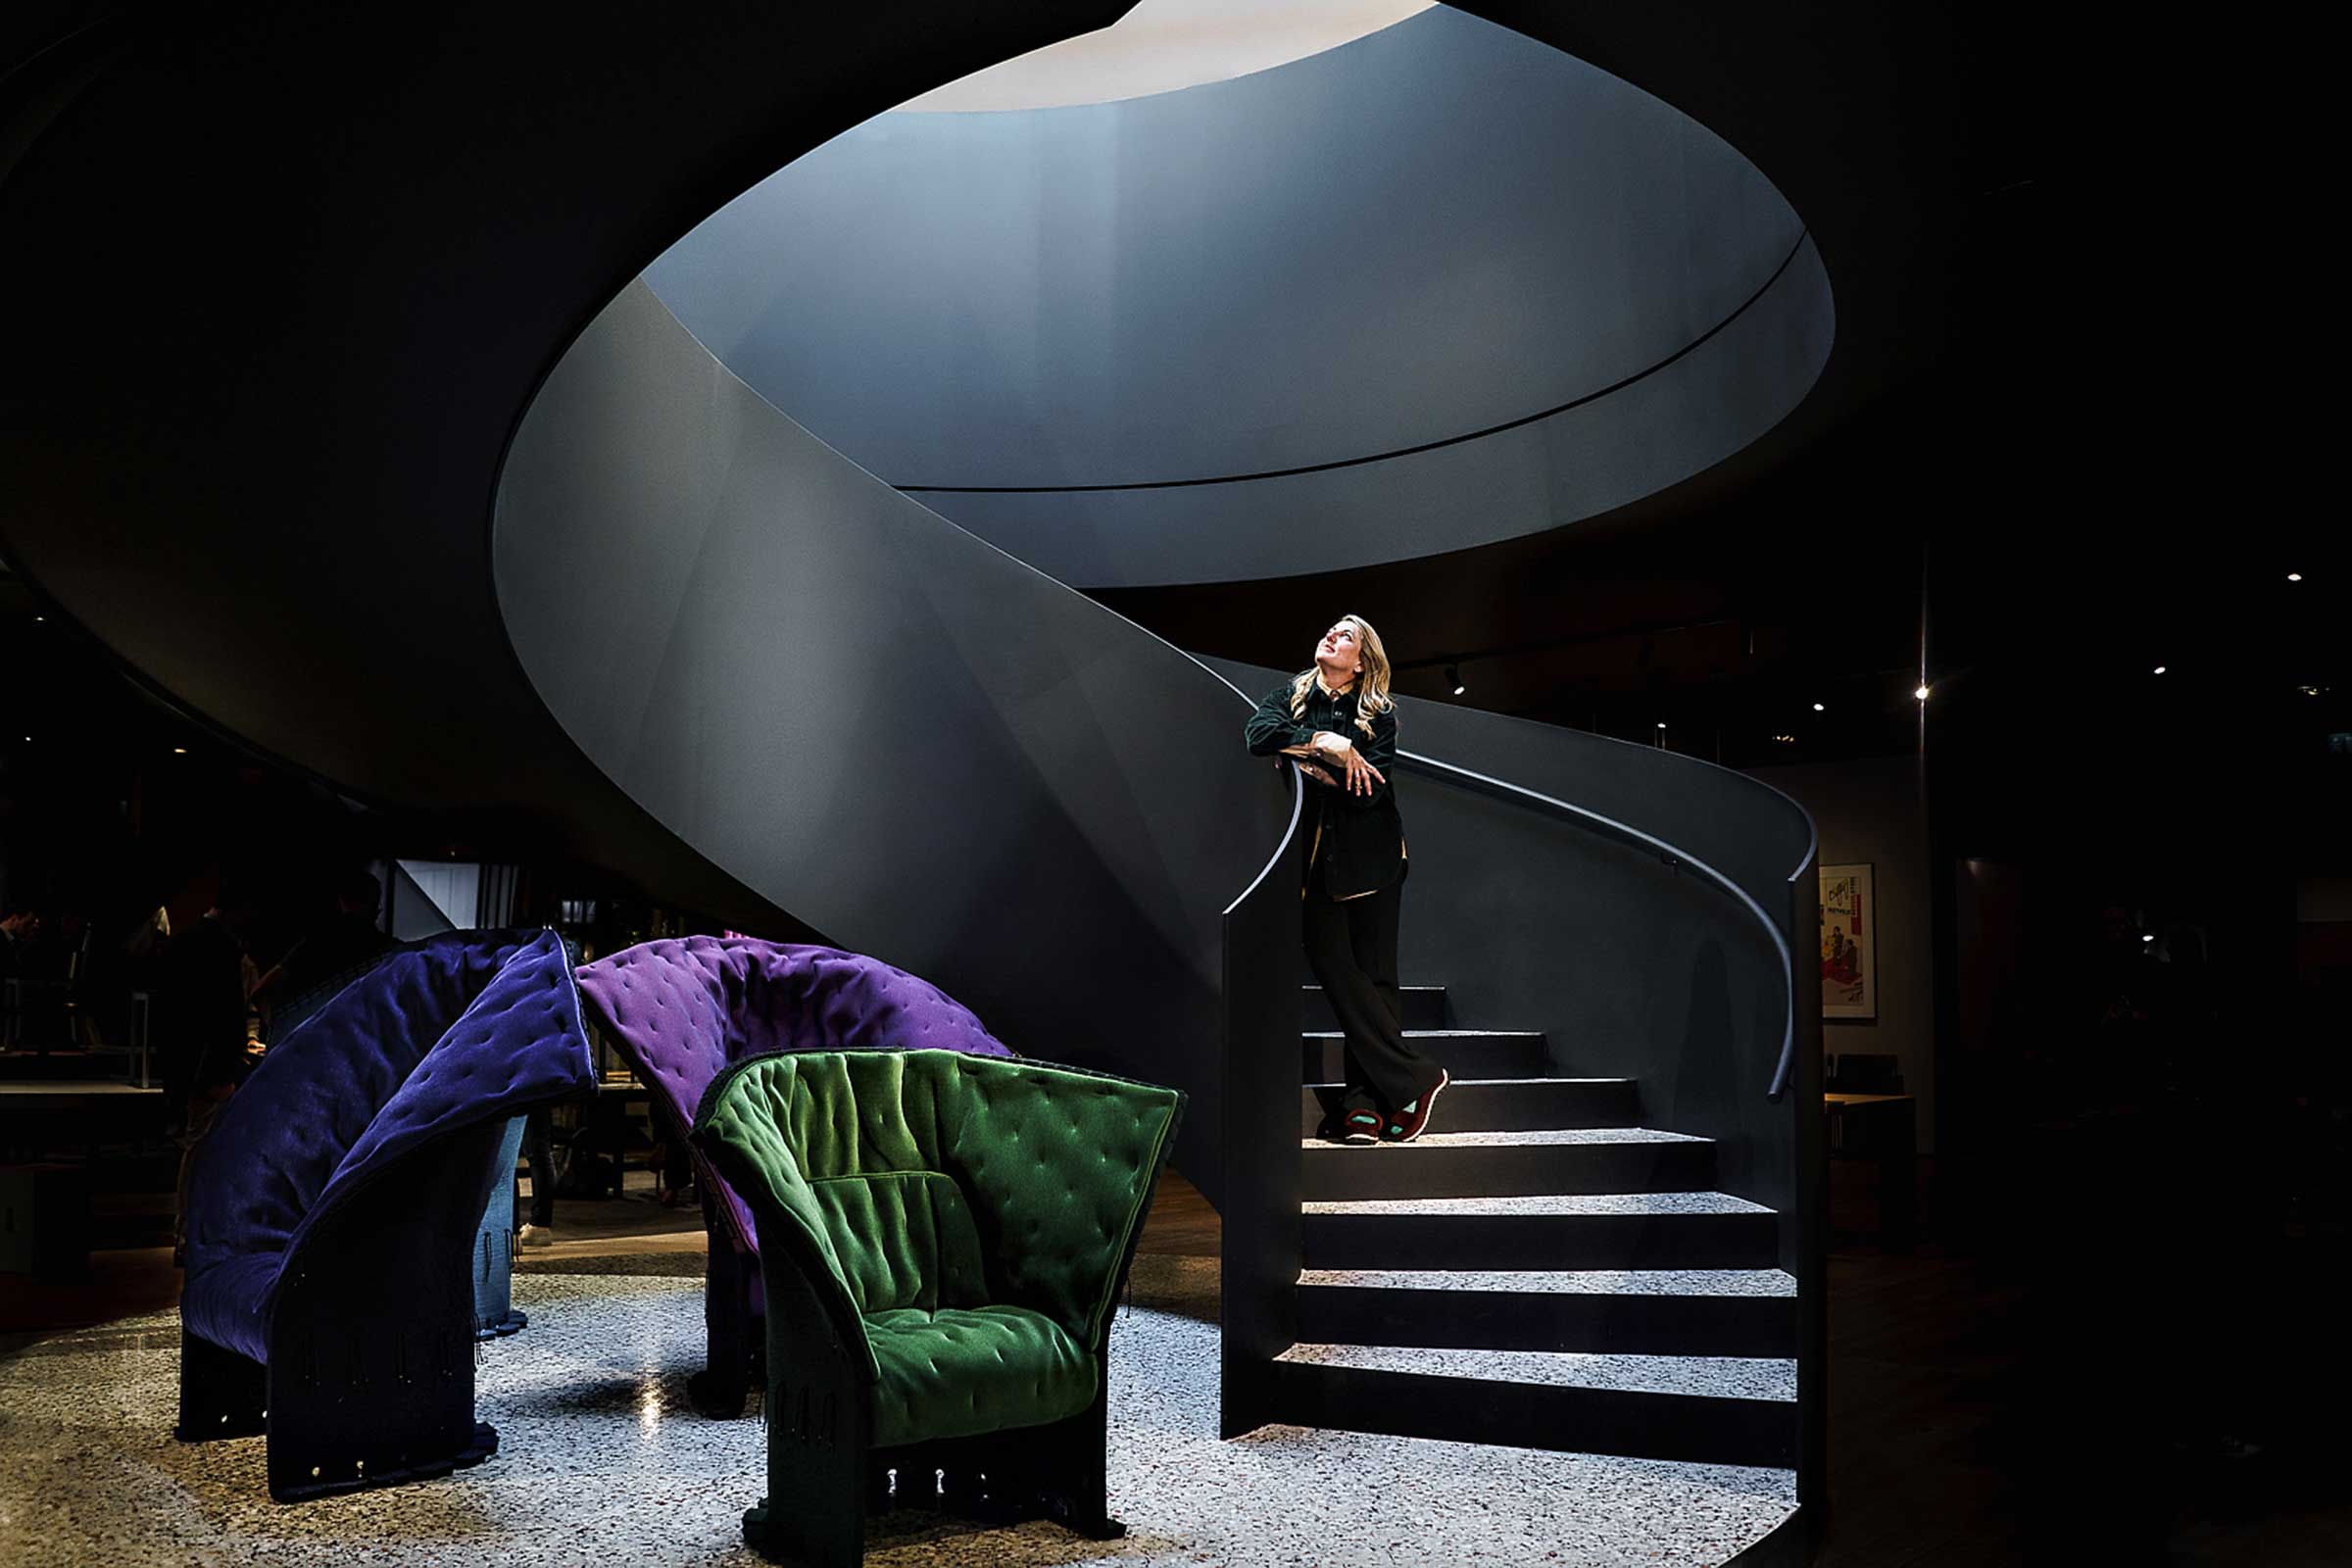 Joyce Wang on Designing Louis Vuitton's Objets Nomades Exhibition